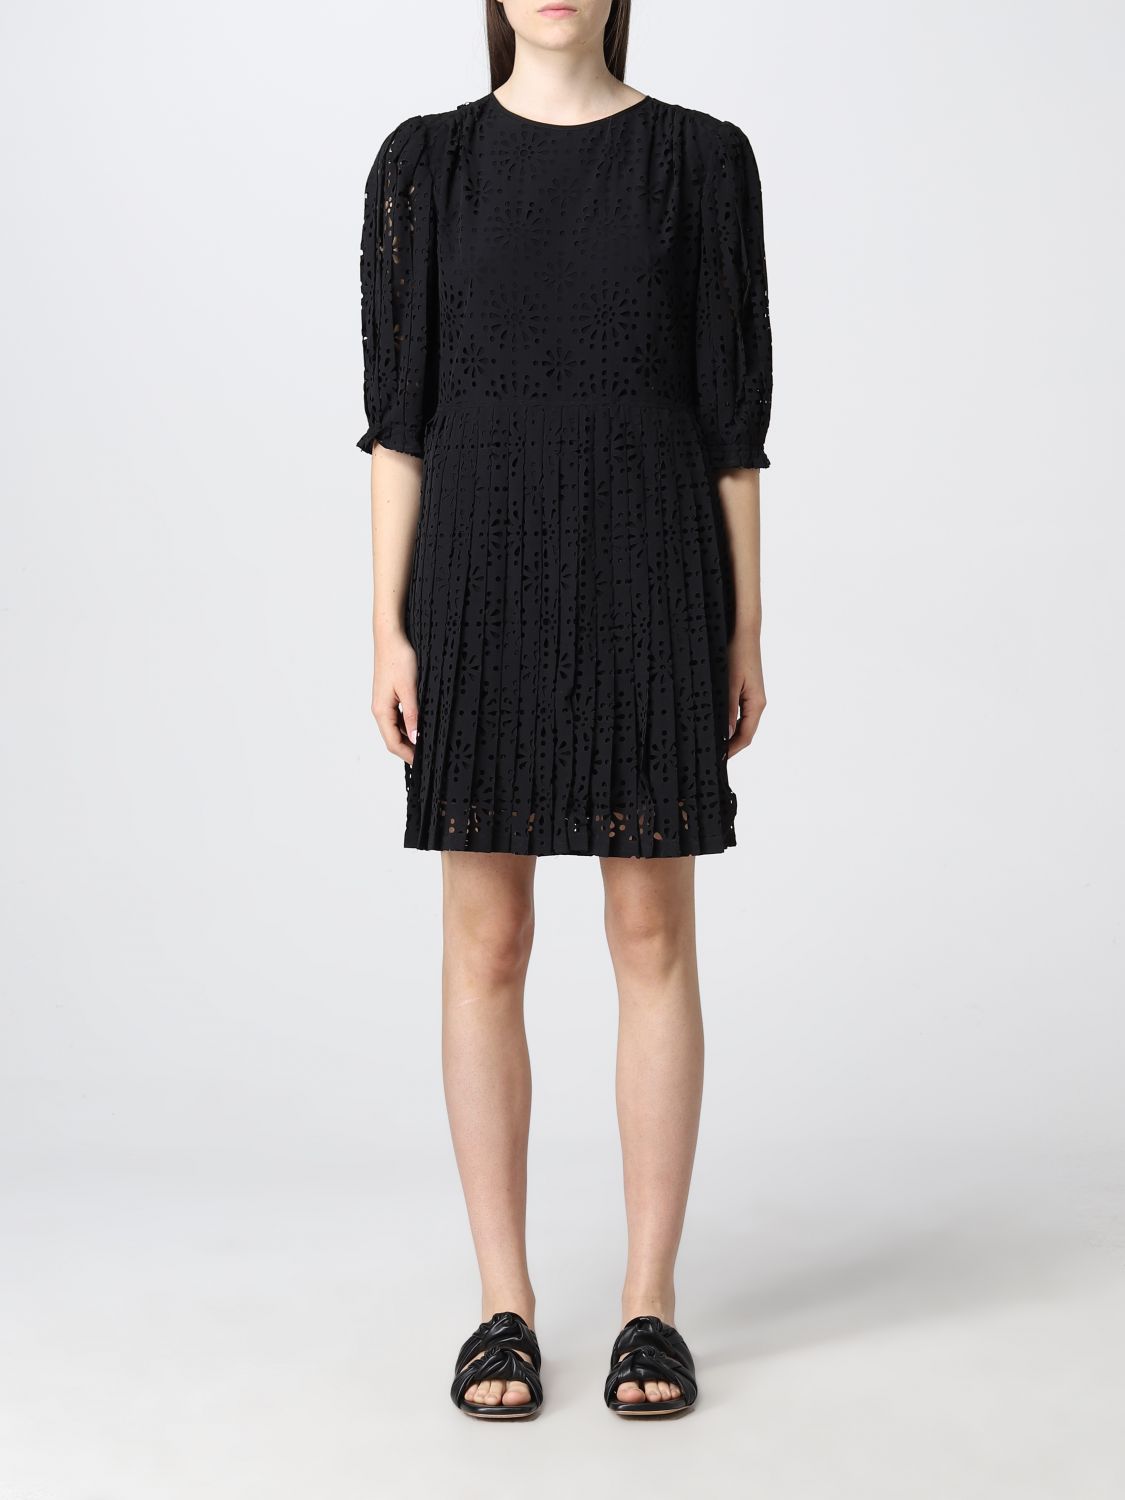 SEE BY CHLOÉ: dress for woman - Black | See By Chloé dress ...